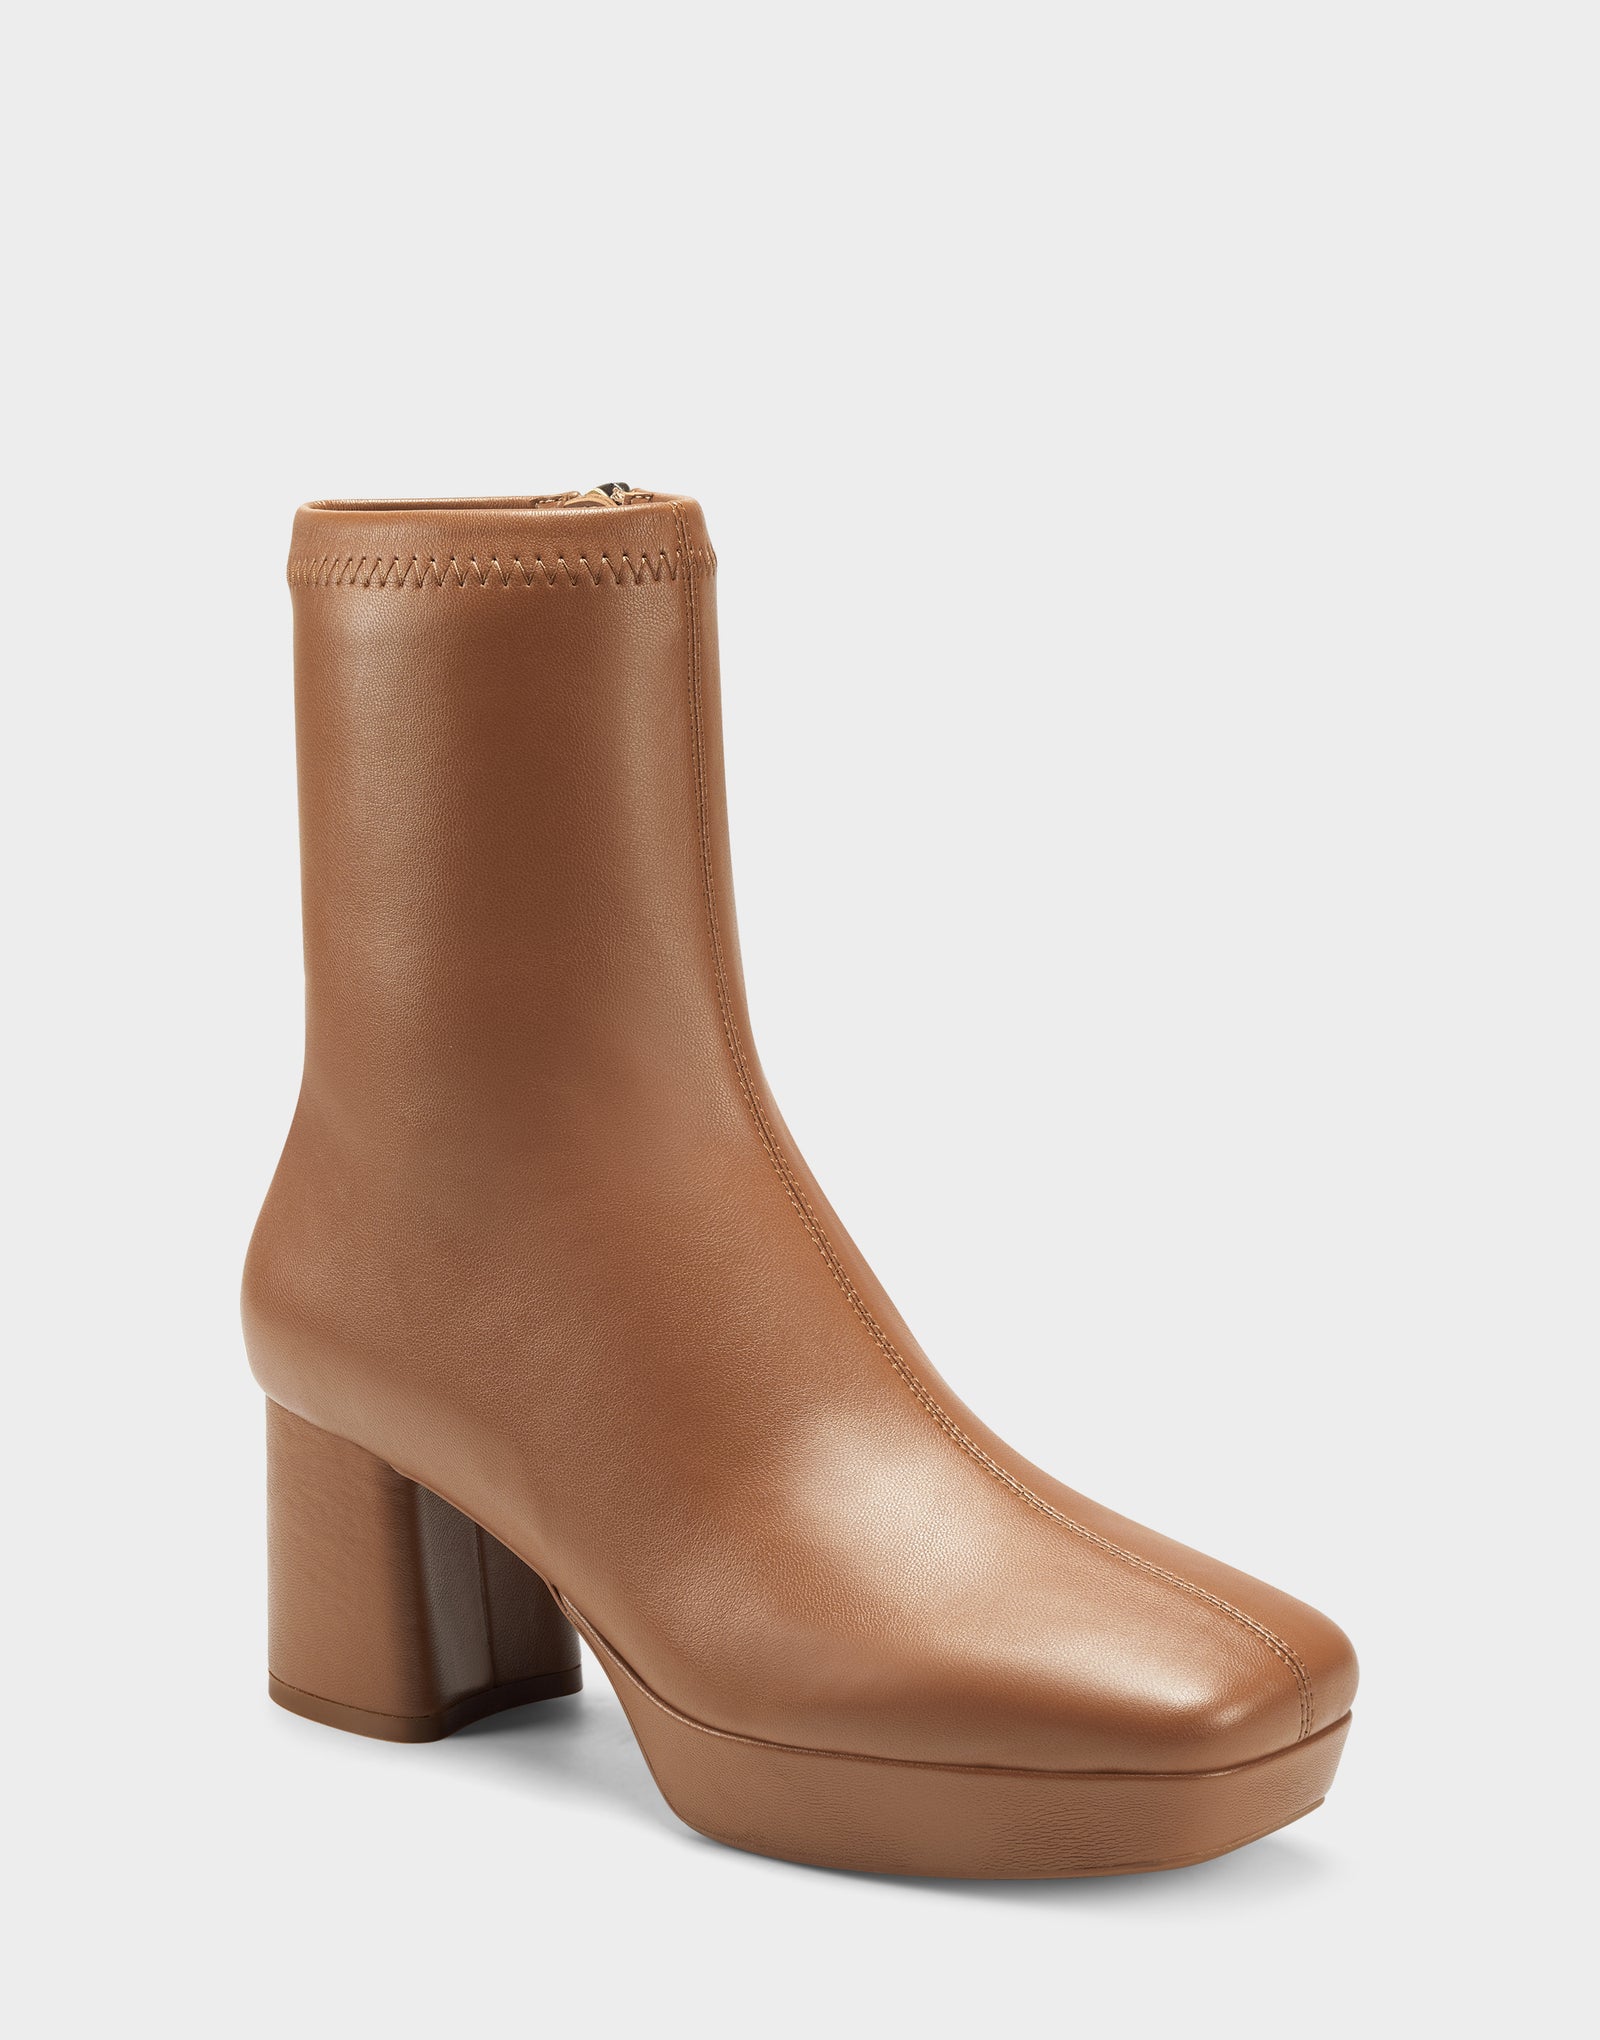 Women's Ankle Boot in Luggage 